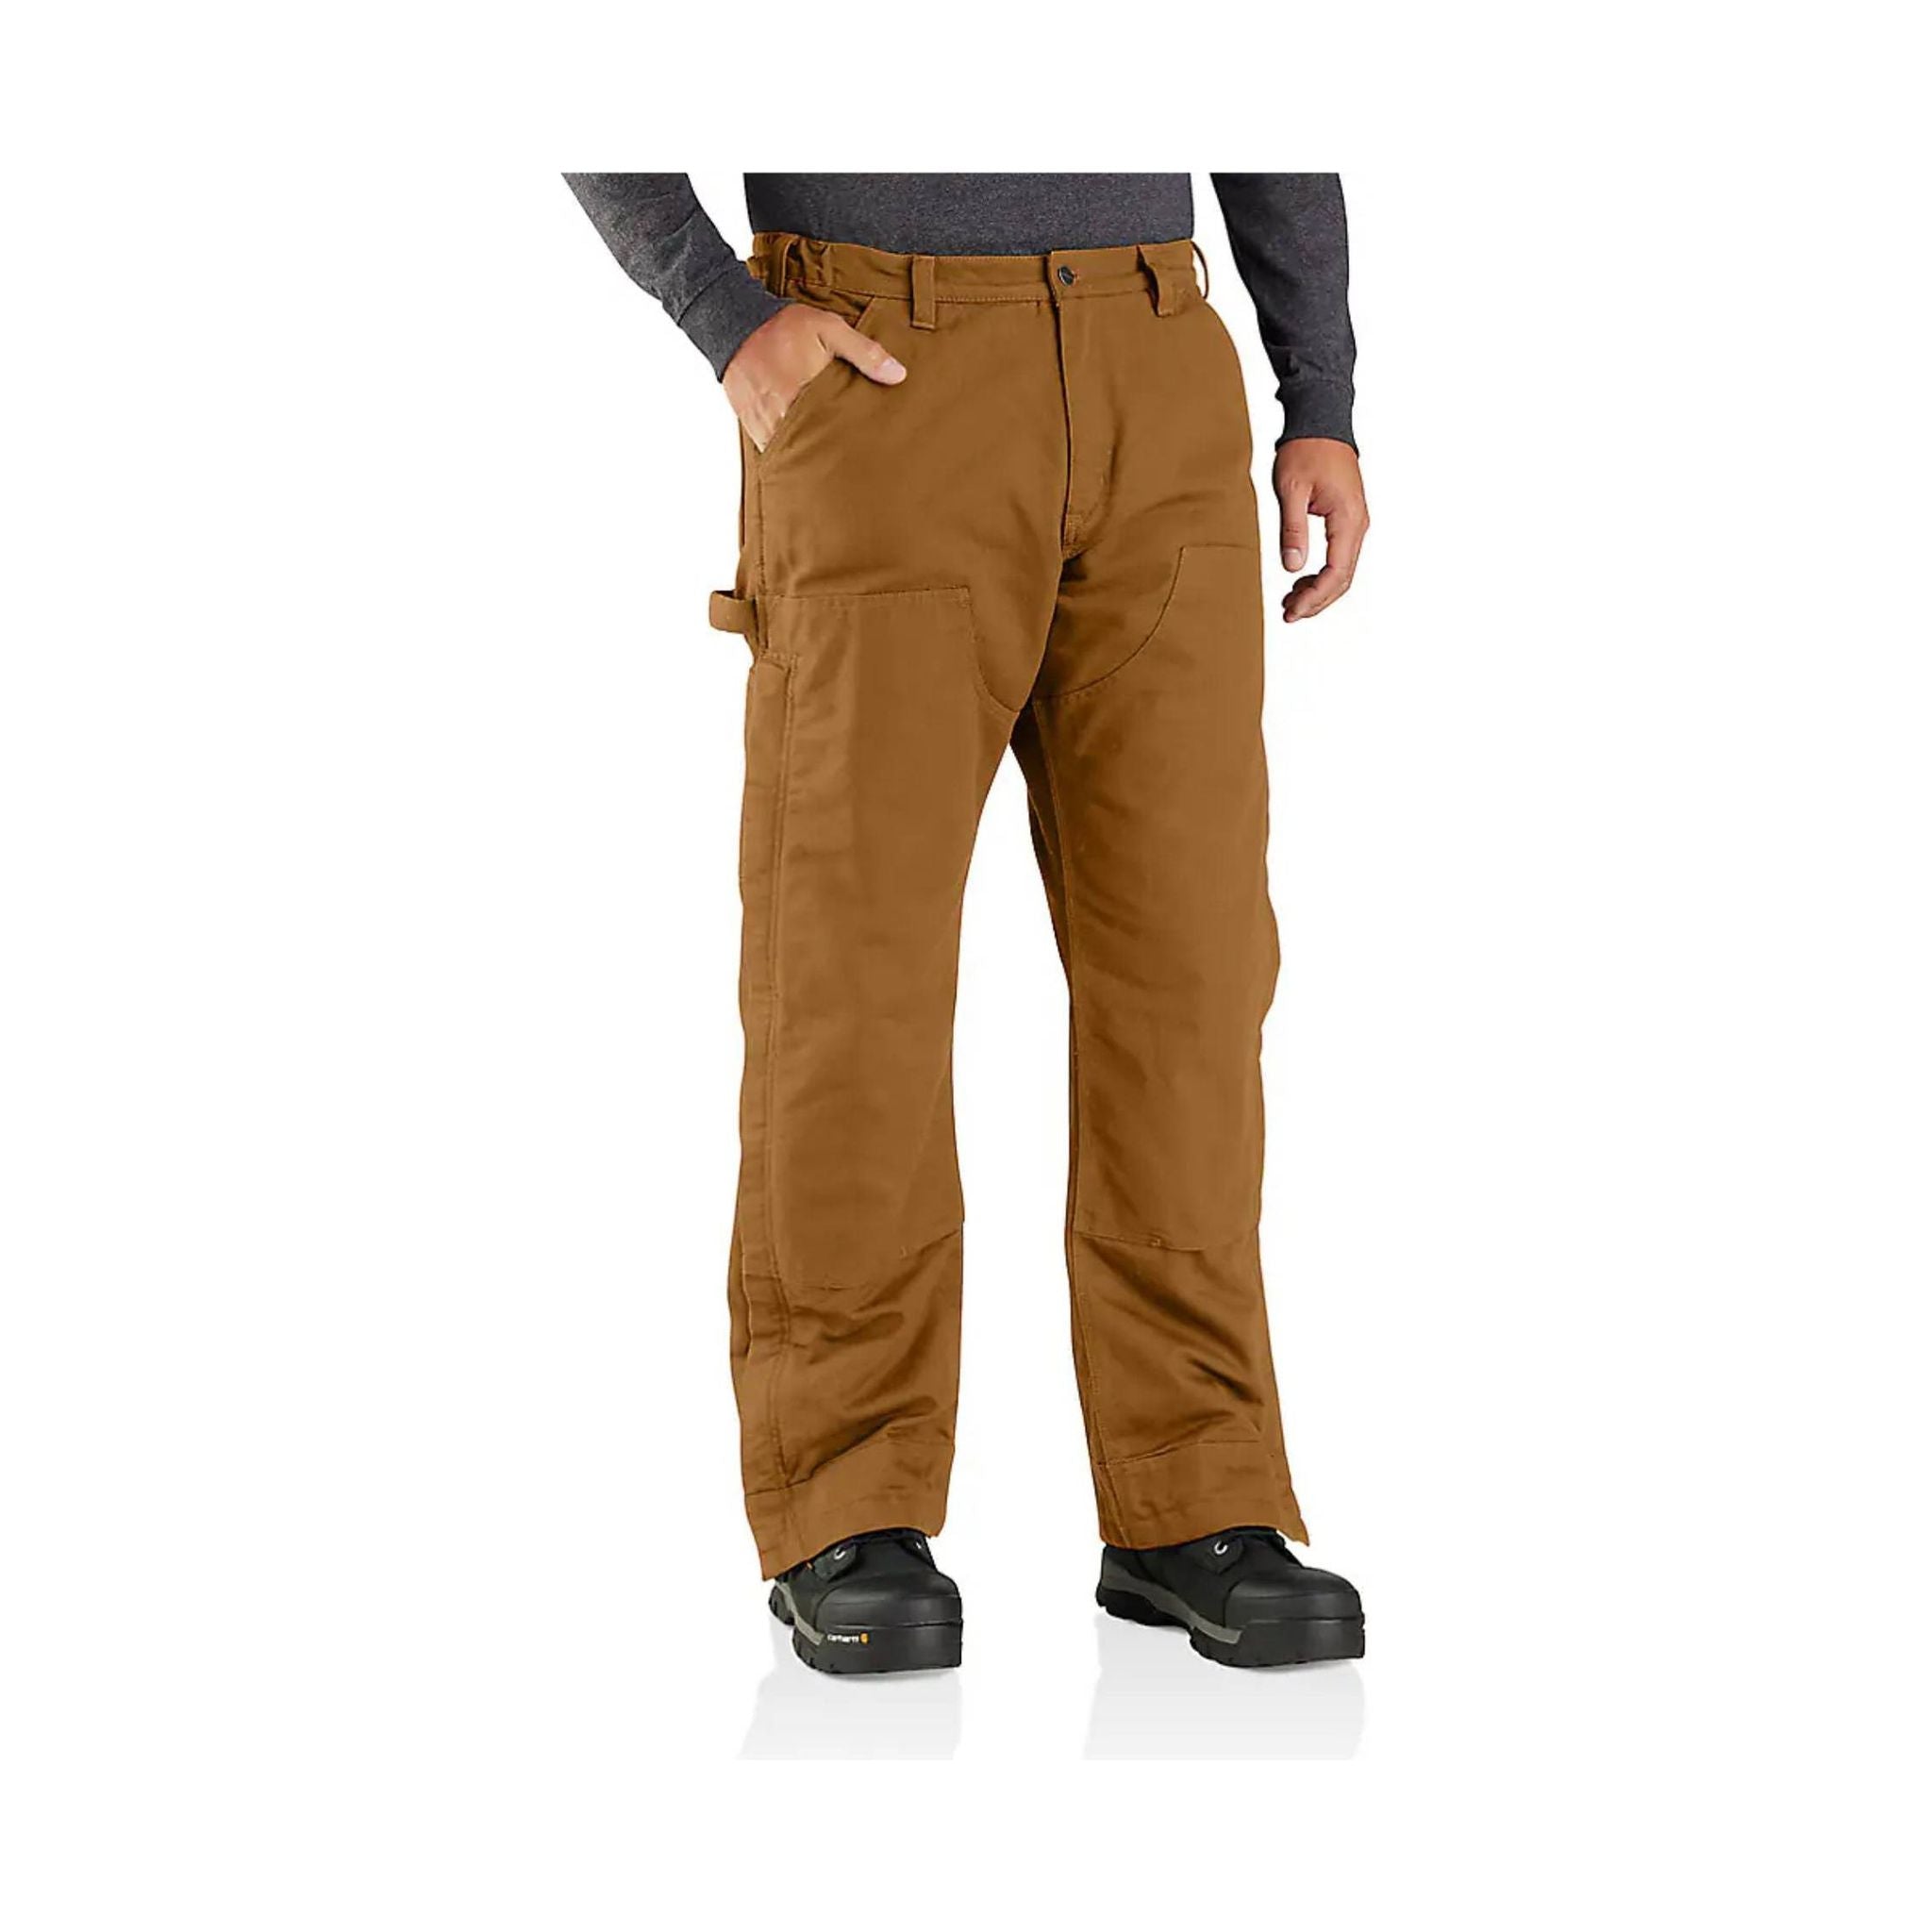 Carhartt Men's Loose Fit Washed Duck Insulated Pant - Brown